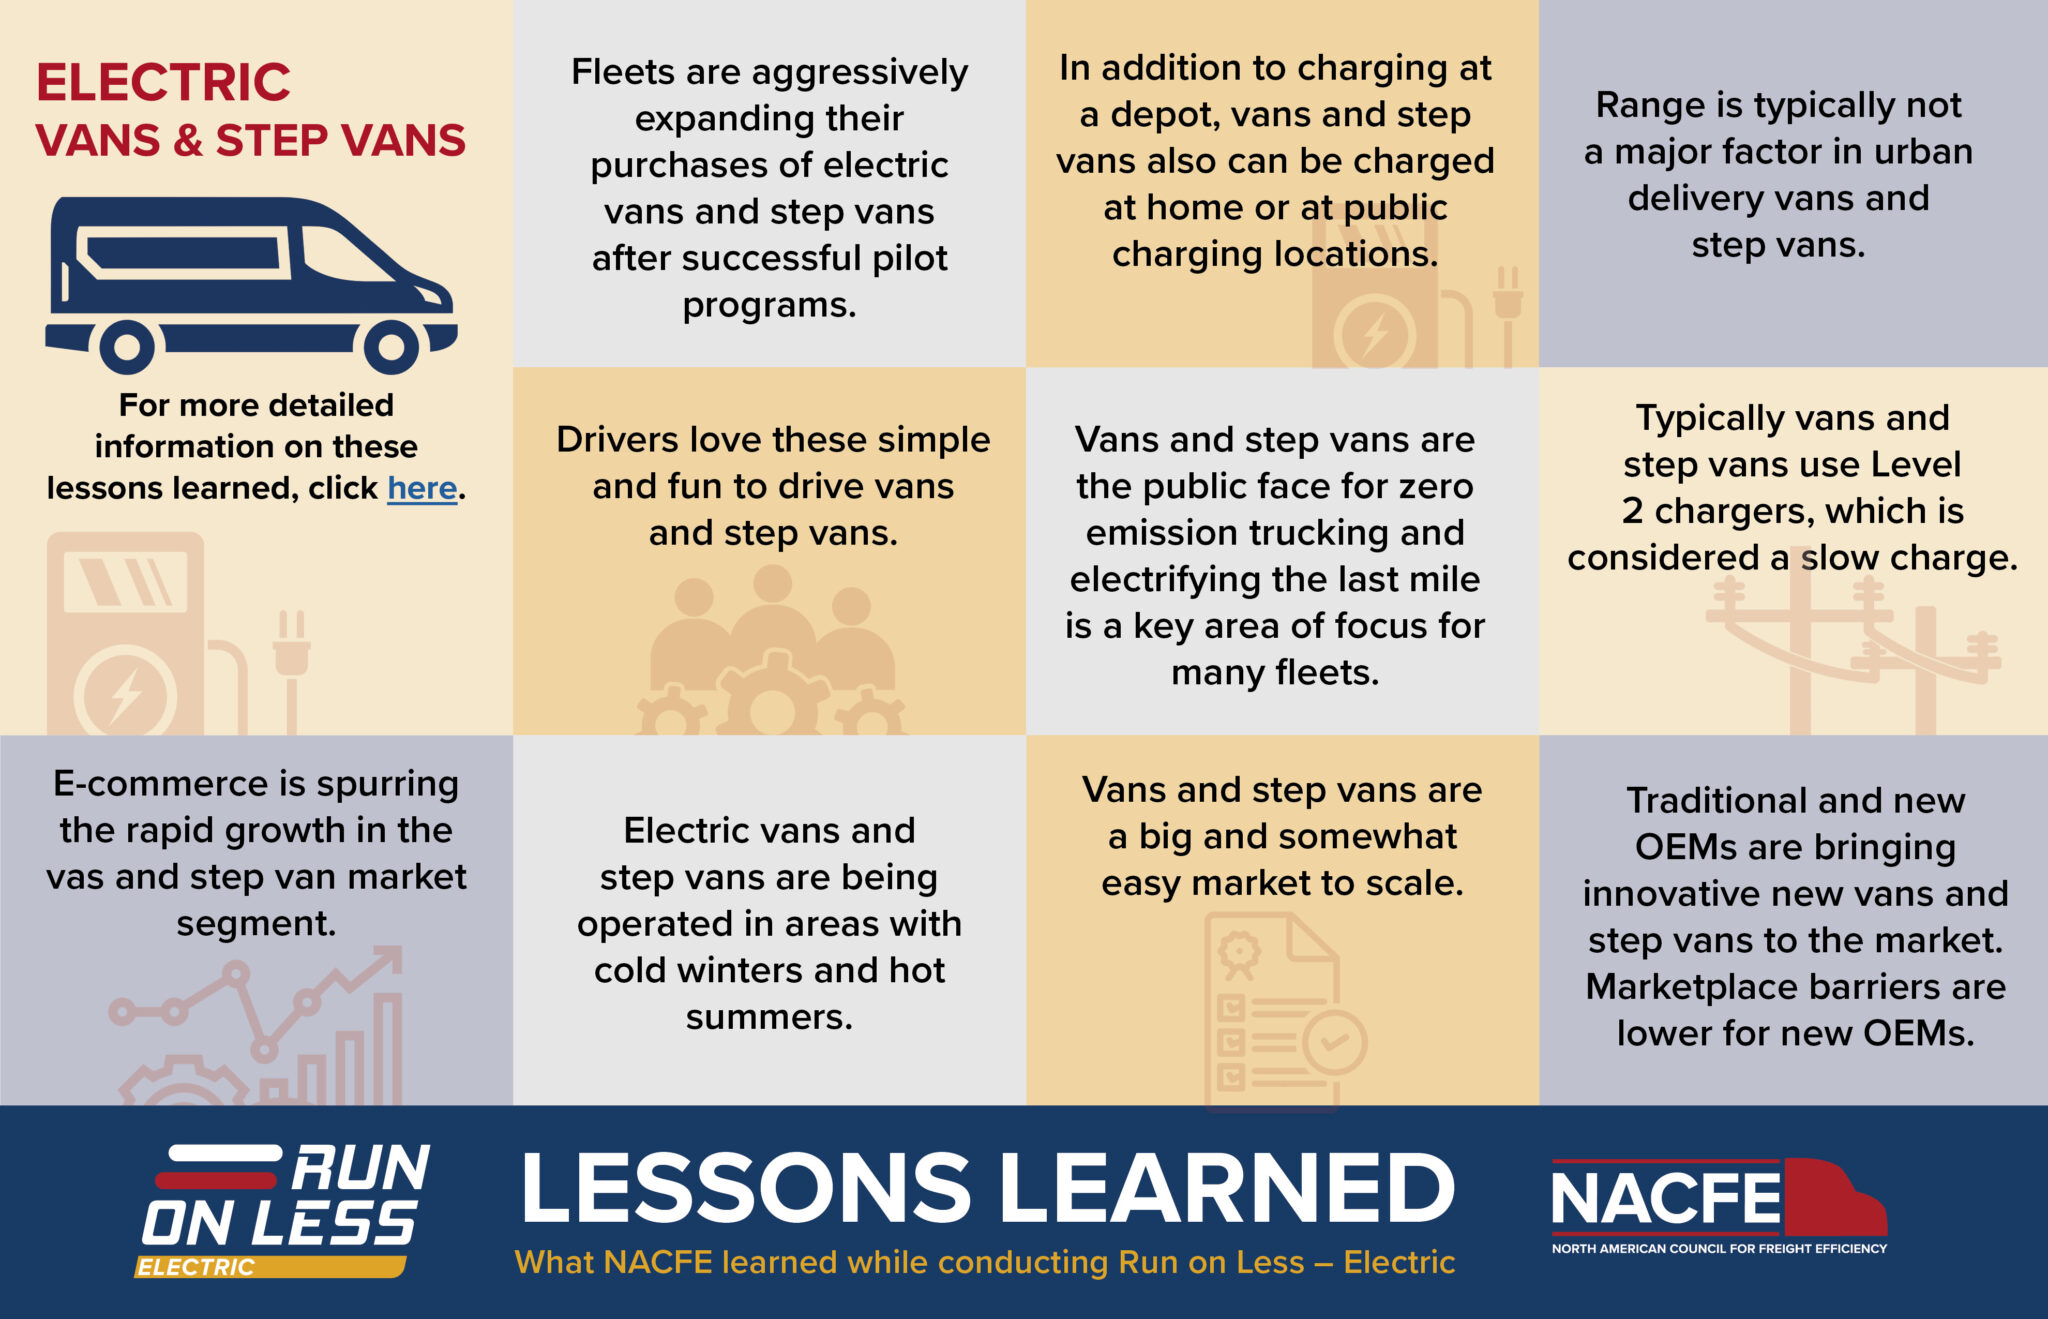 vans-lessons-learned-infographic